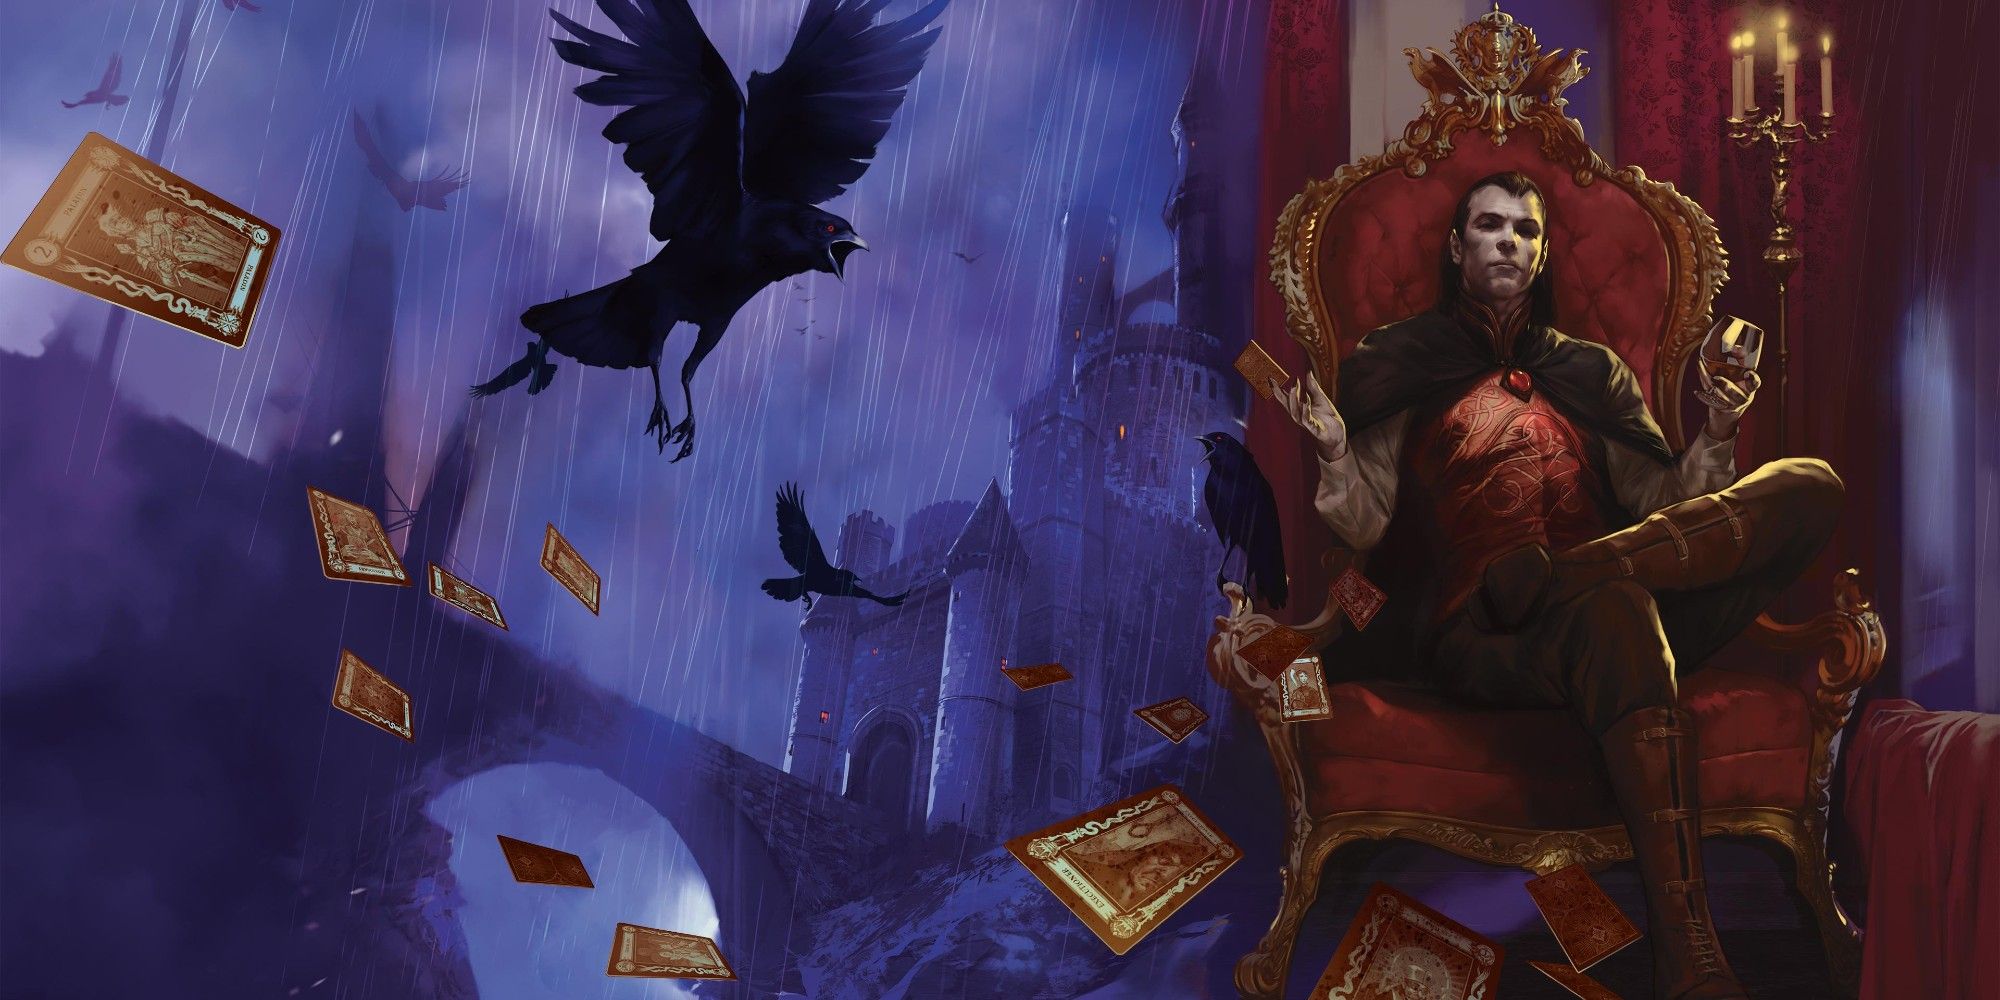 Curse Of Strahd Cover Art with Strahd on his throne, cards and crows in the night sky